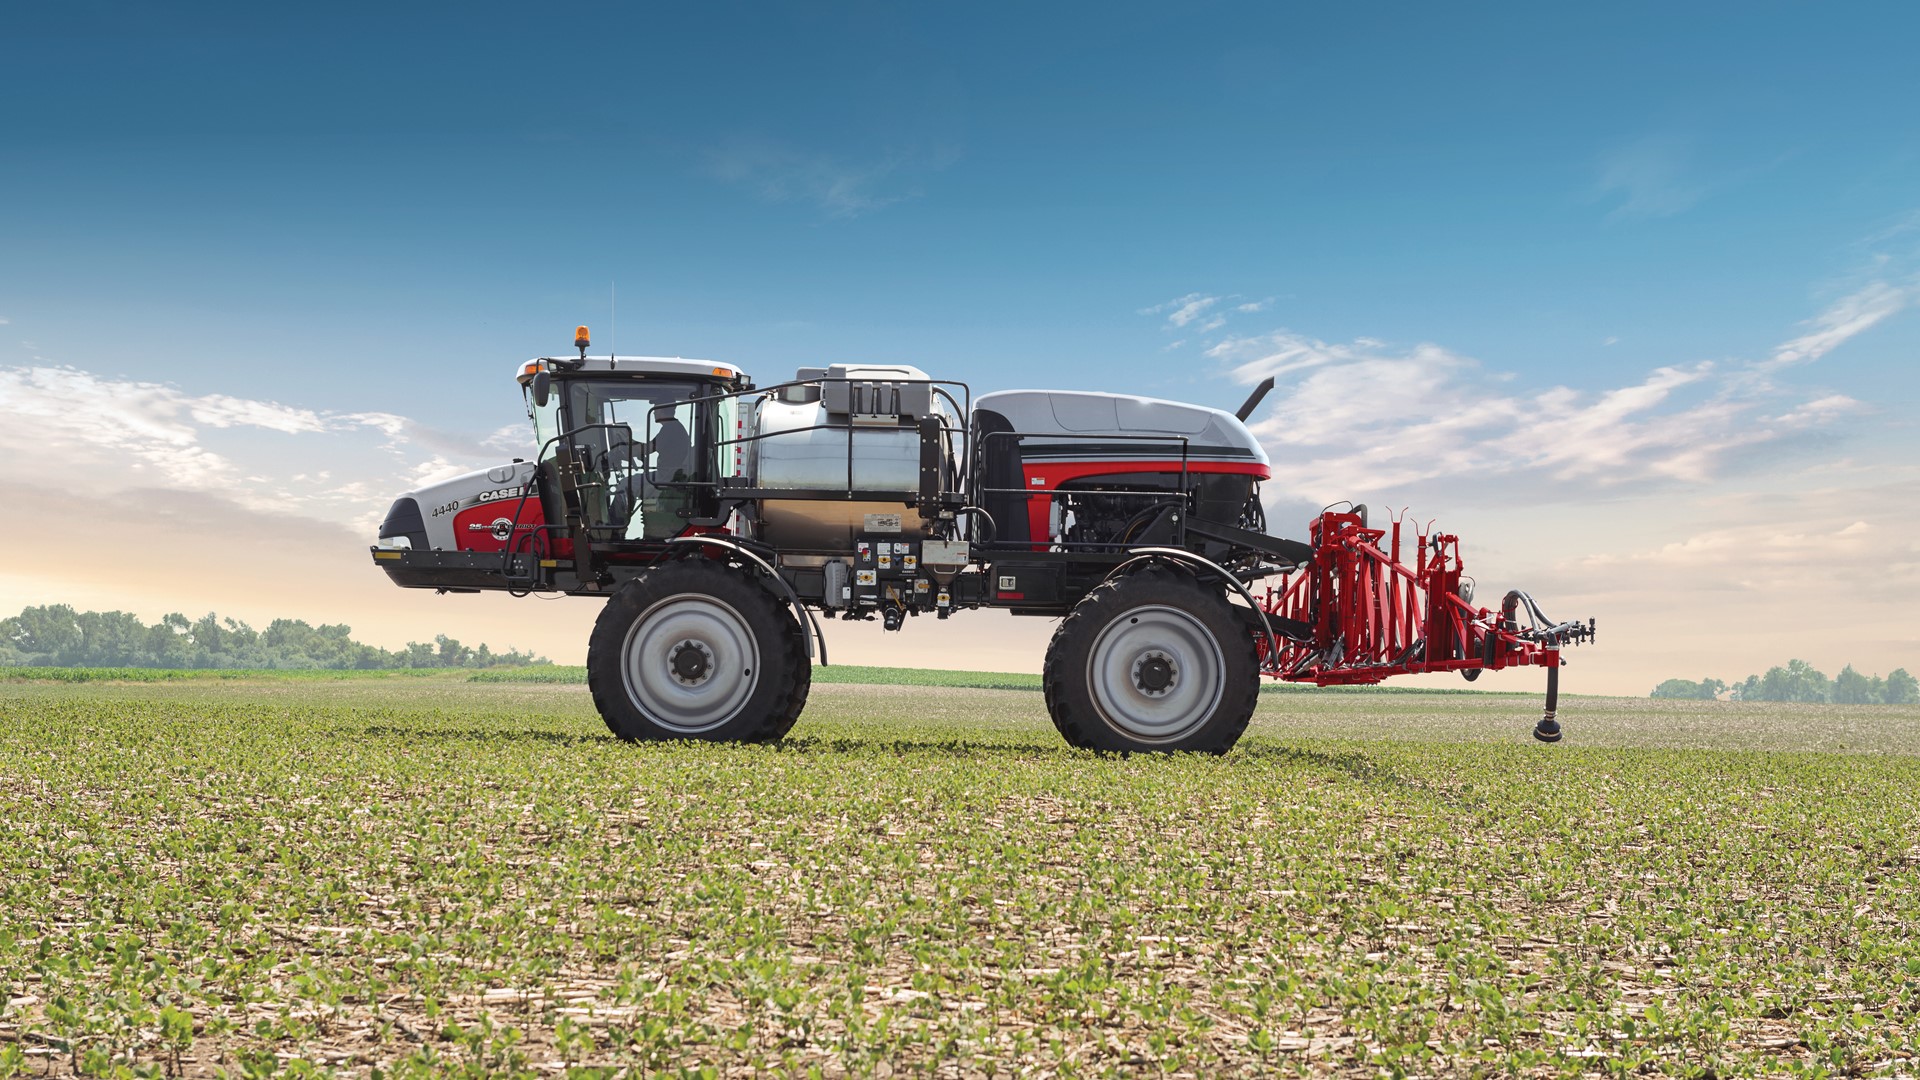 Case IH will produce special Patriot® 4440 and 3340 models at the Benson, Minn.